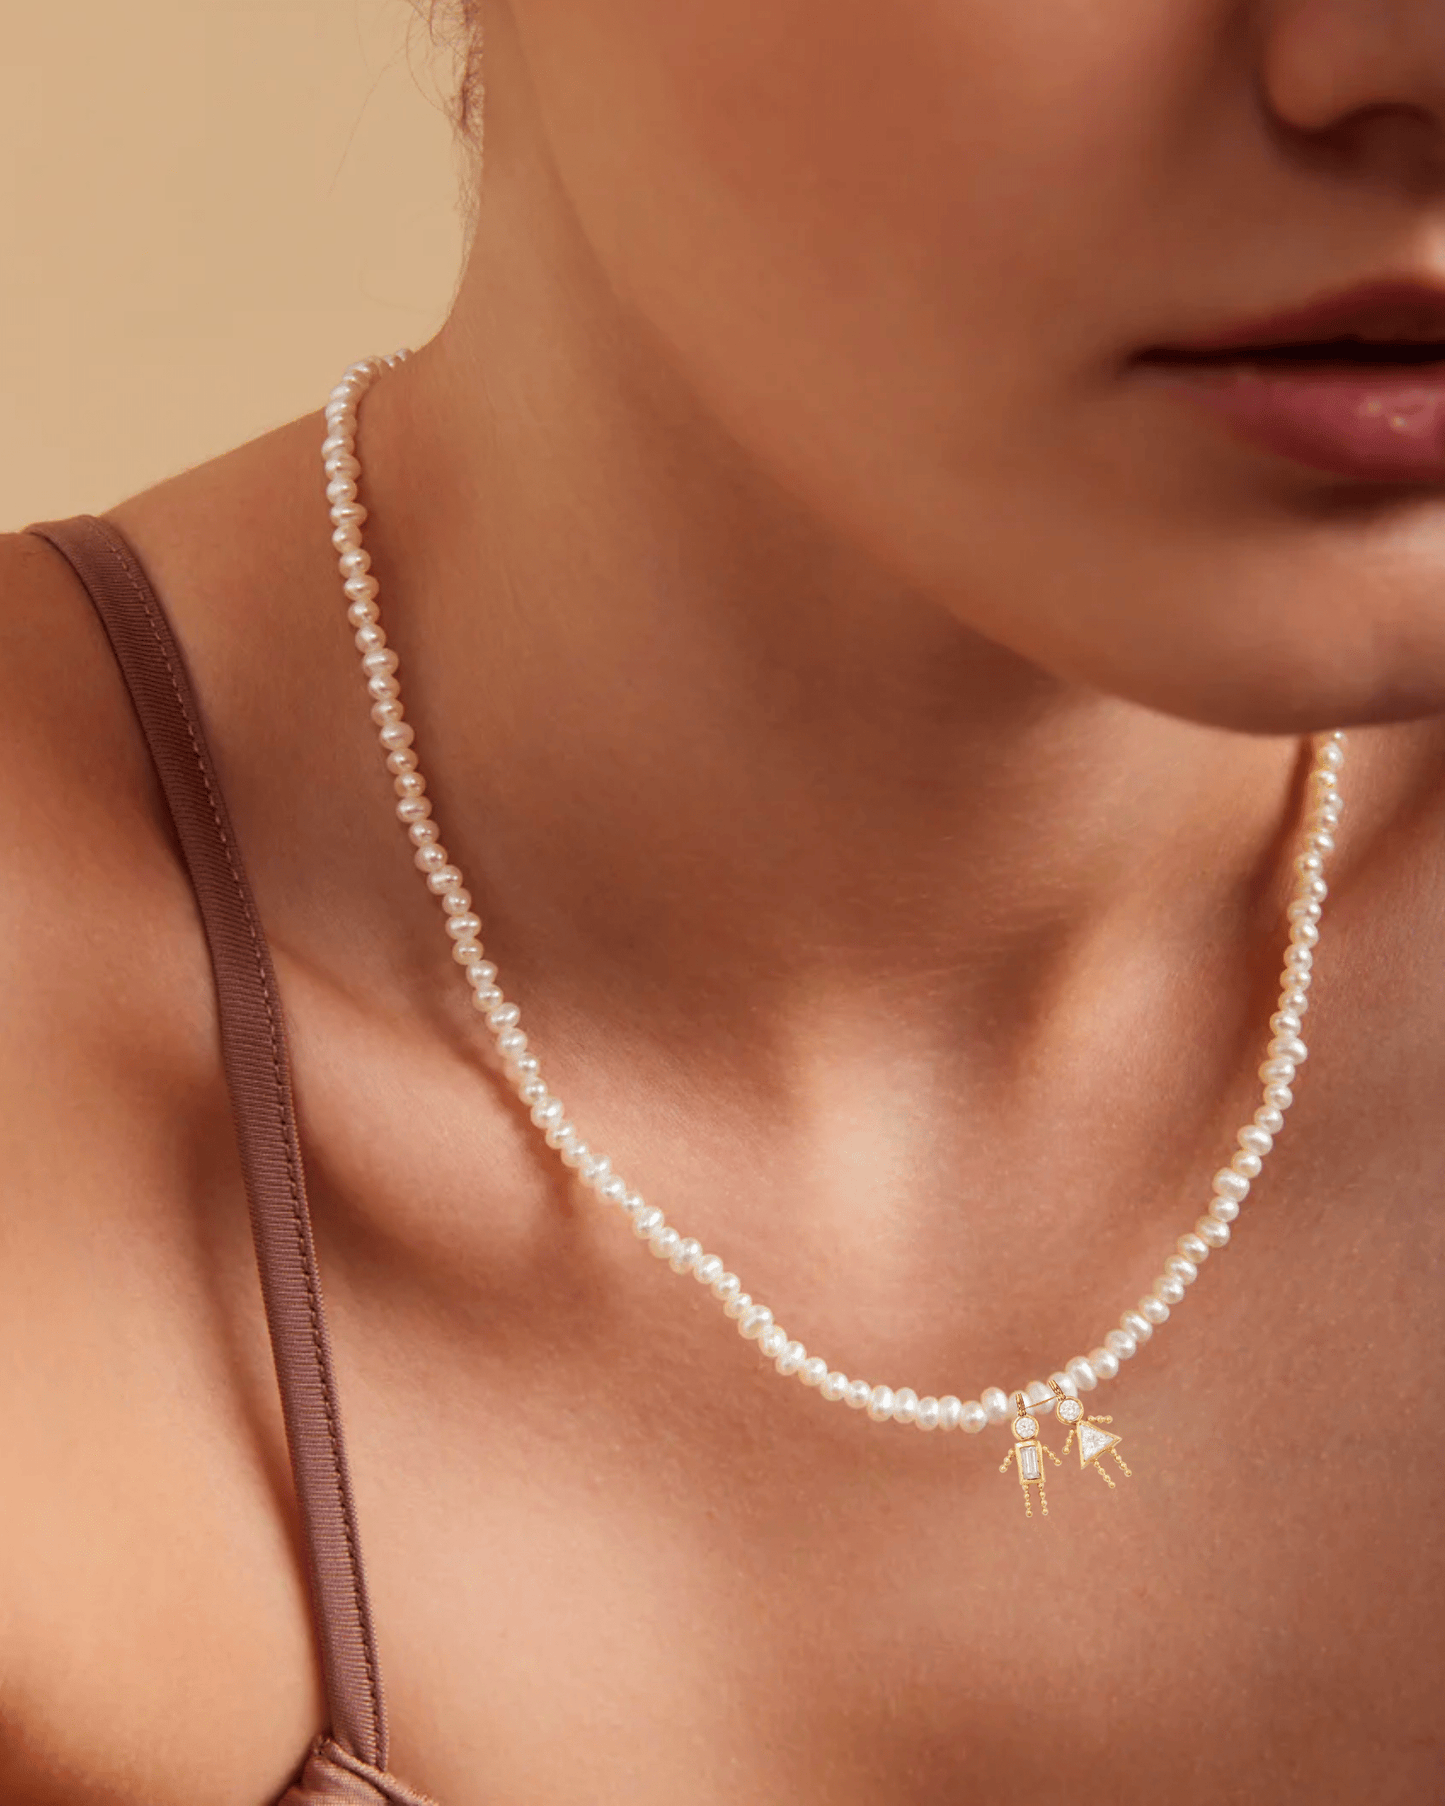 Mini Me Pearl Necklace - 925 Sterling Silver Necklaces magal-dev 